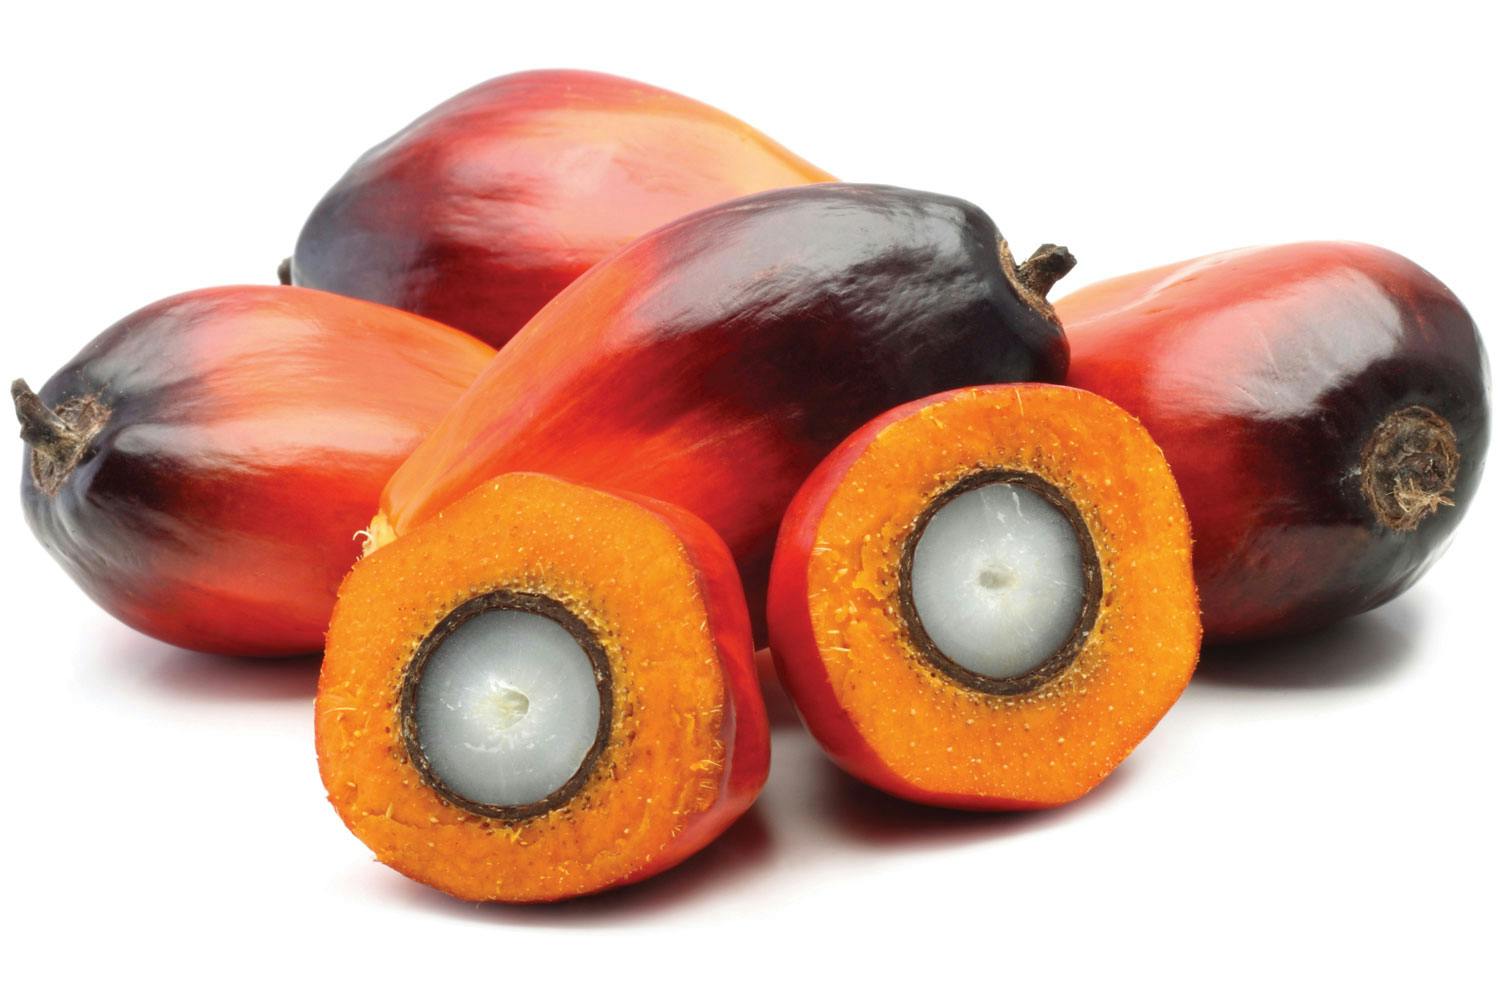 5 palm fruits. They’re oval with a red-to-black gradient peel. One is cut, showing a orange flesh with a waxy white core.